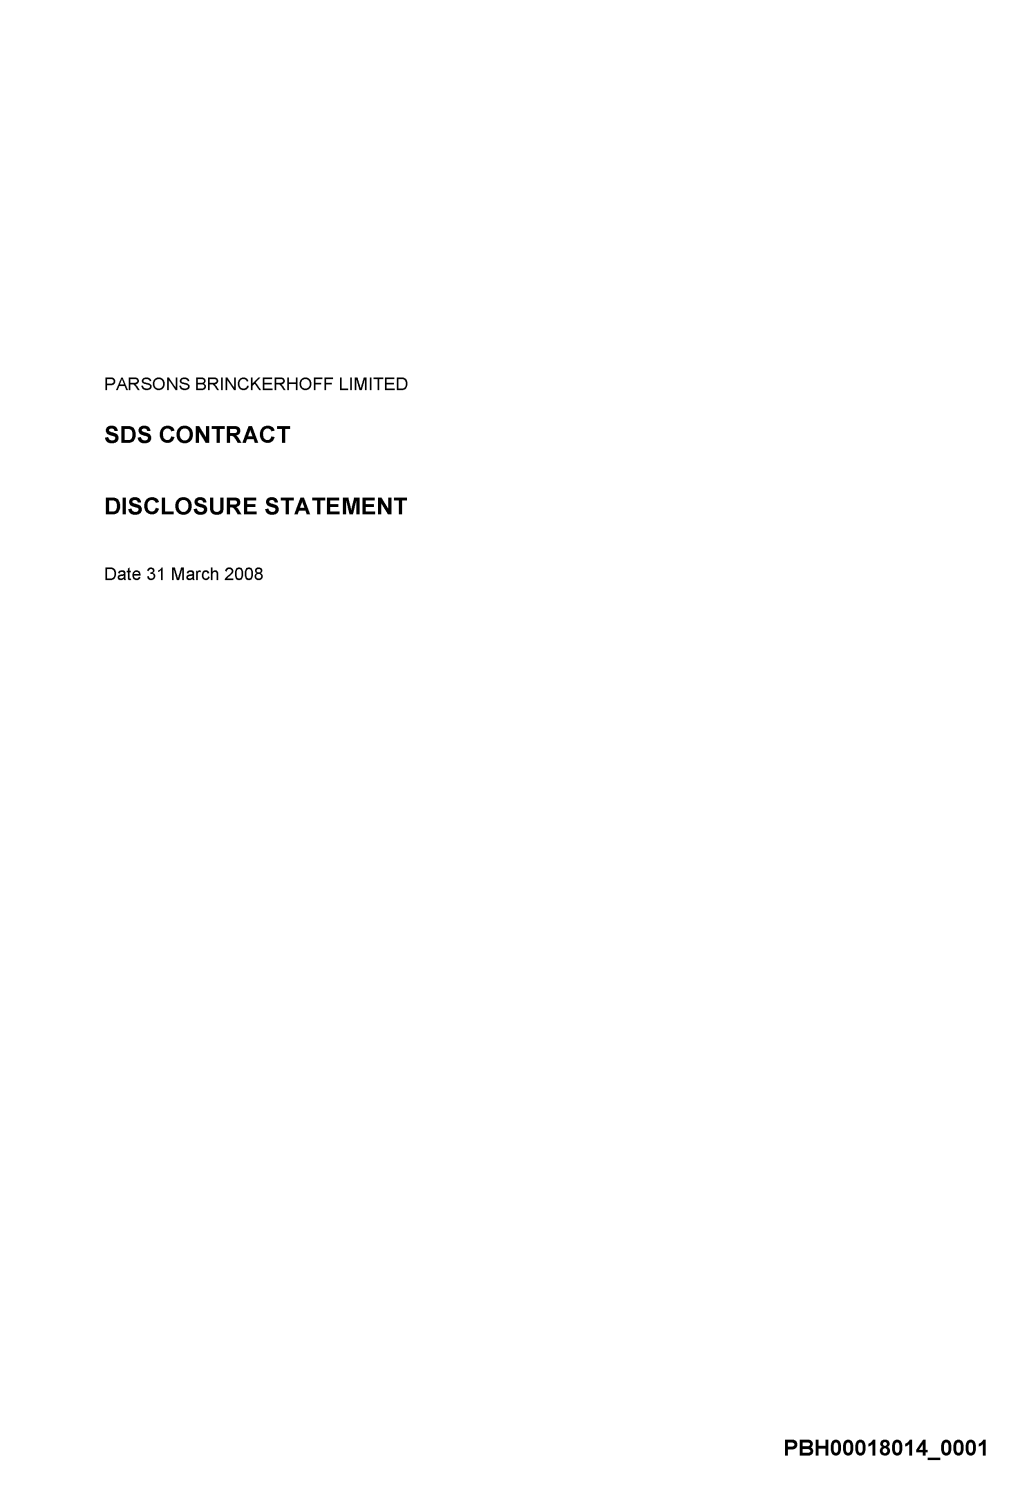 PBH00018014 0001 Table of Contents